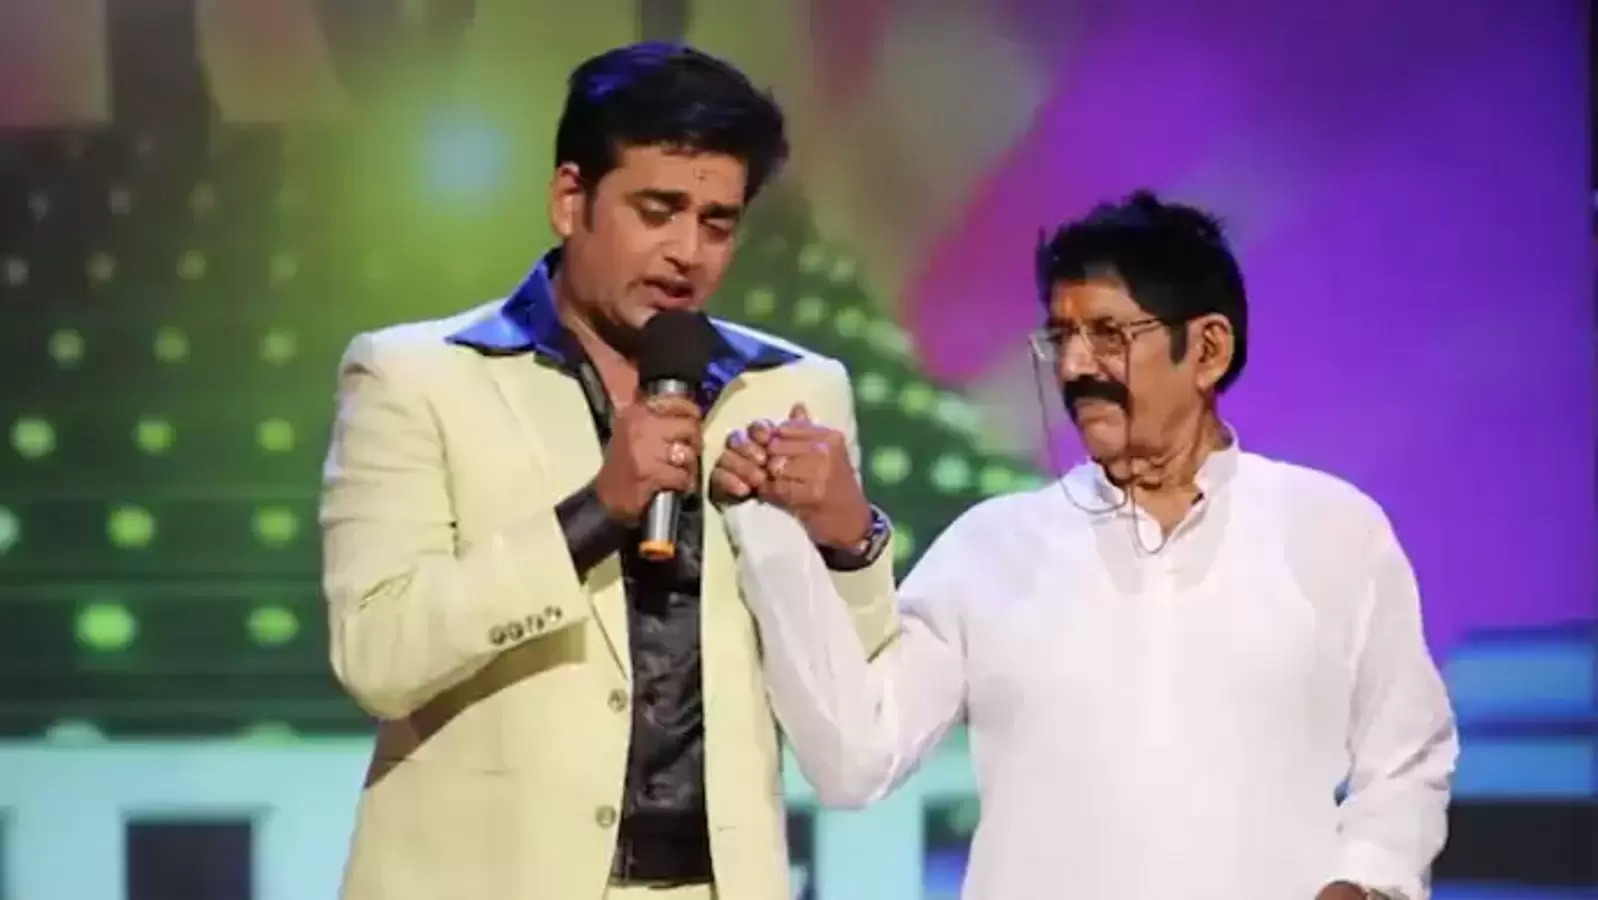 When Ravi Kishan’s father had beaten him with leather belt for wanting to be an actor: ‘Woh sab aashirvaad tha’